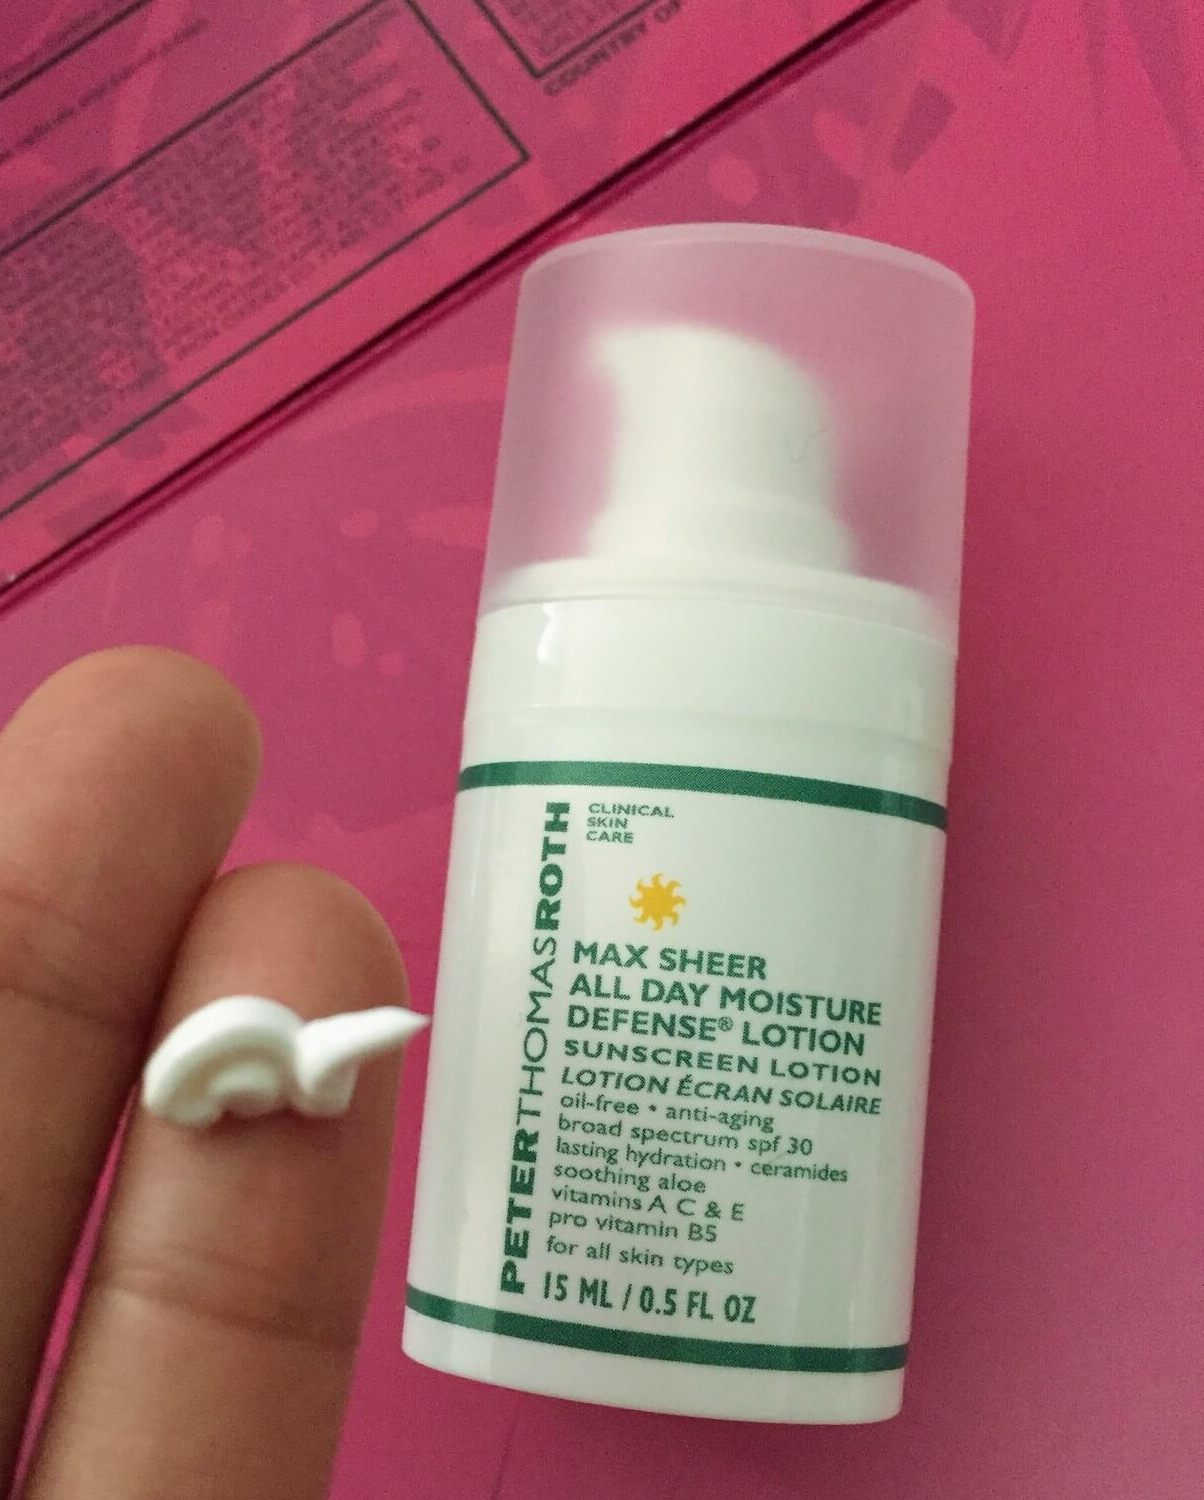 Peter Thomas Roth Max Sheer All Day Moisture Sunscreen Review